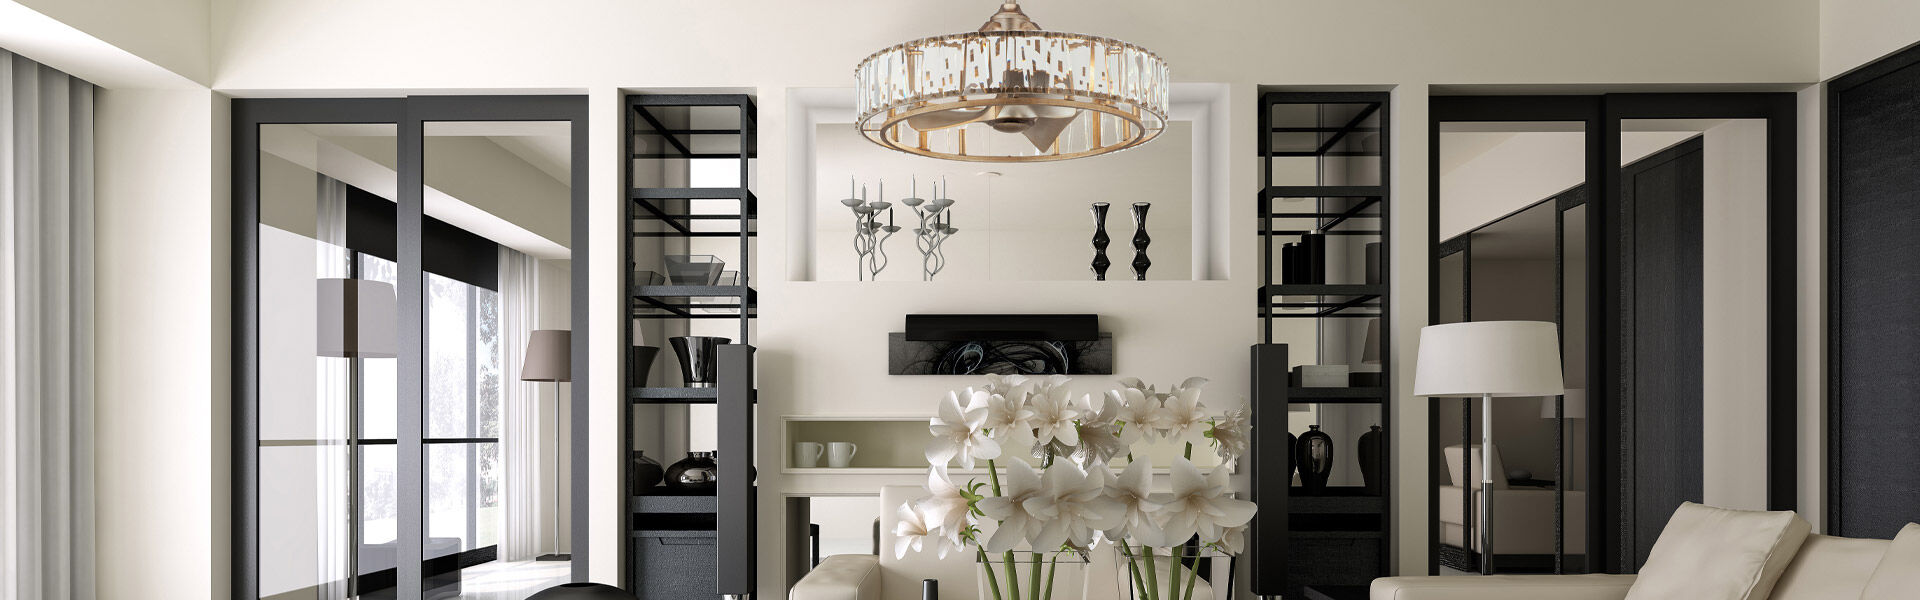 Maxim Lighting | 20% Off Entire Line | ends 5.28